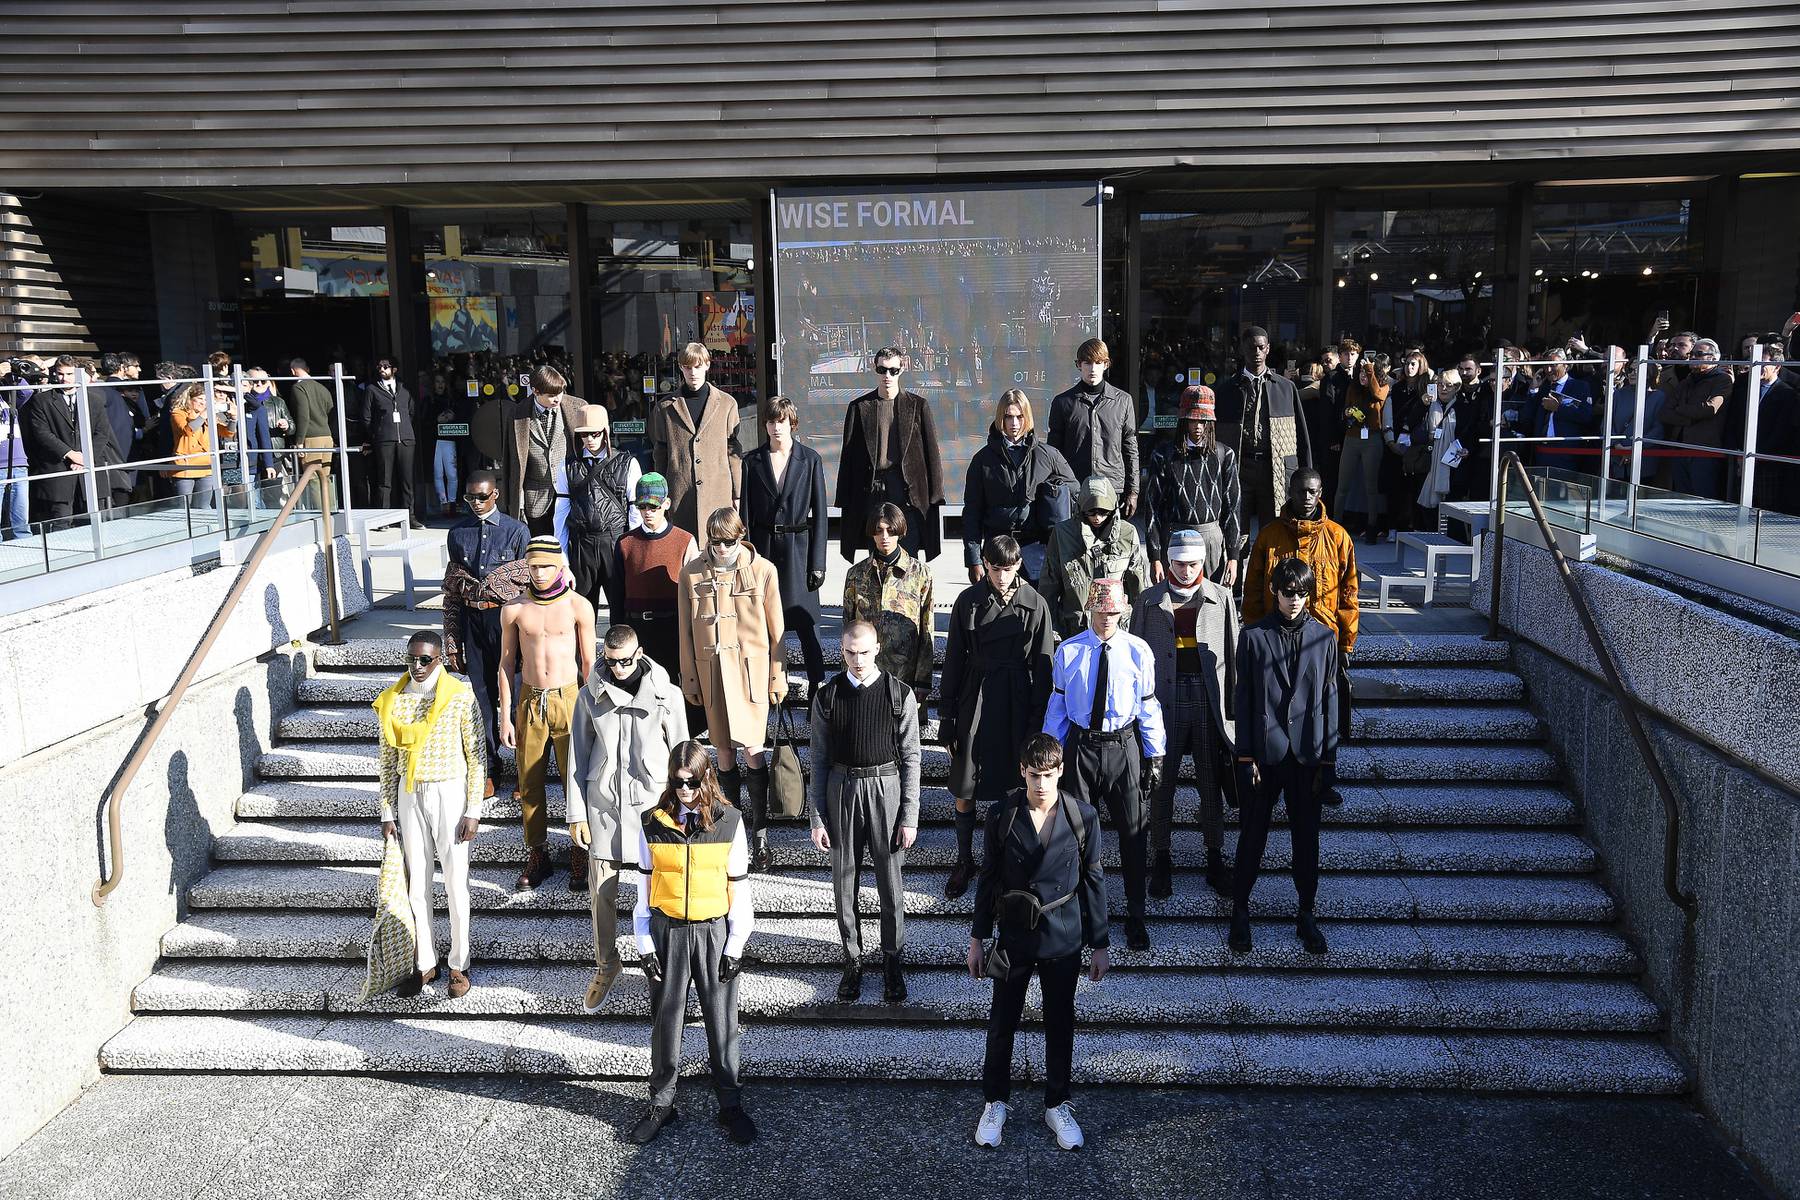 Atmosphere at the Otherwise Formal fashion show during Pitti Immagine Uomo 97 at Fortezza Da Basso on January 8, 2020 in Florence, Italy.